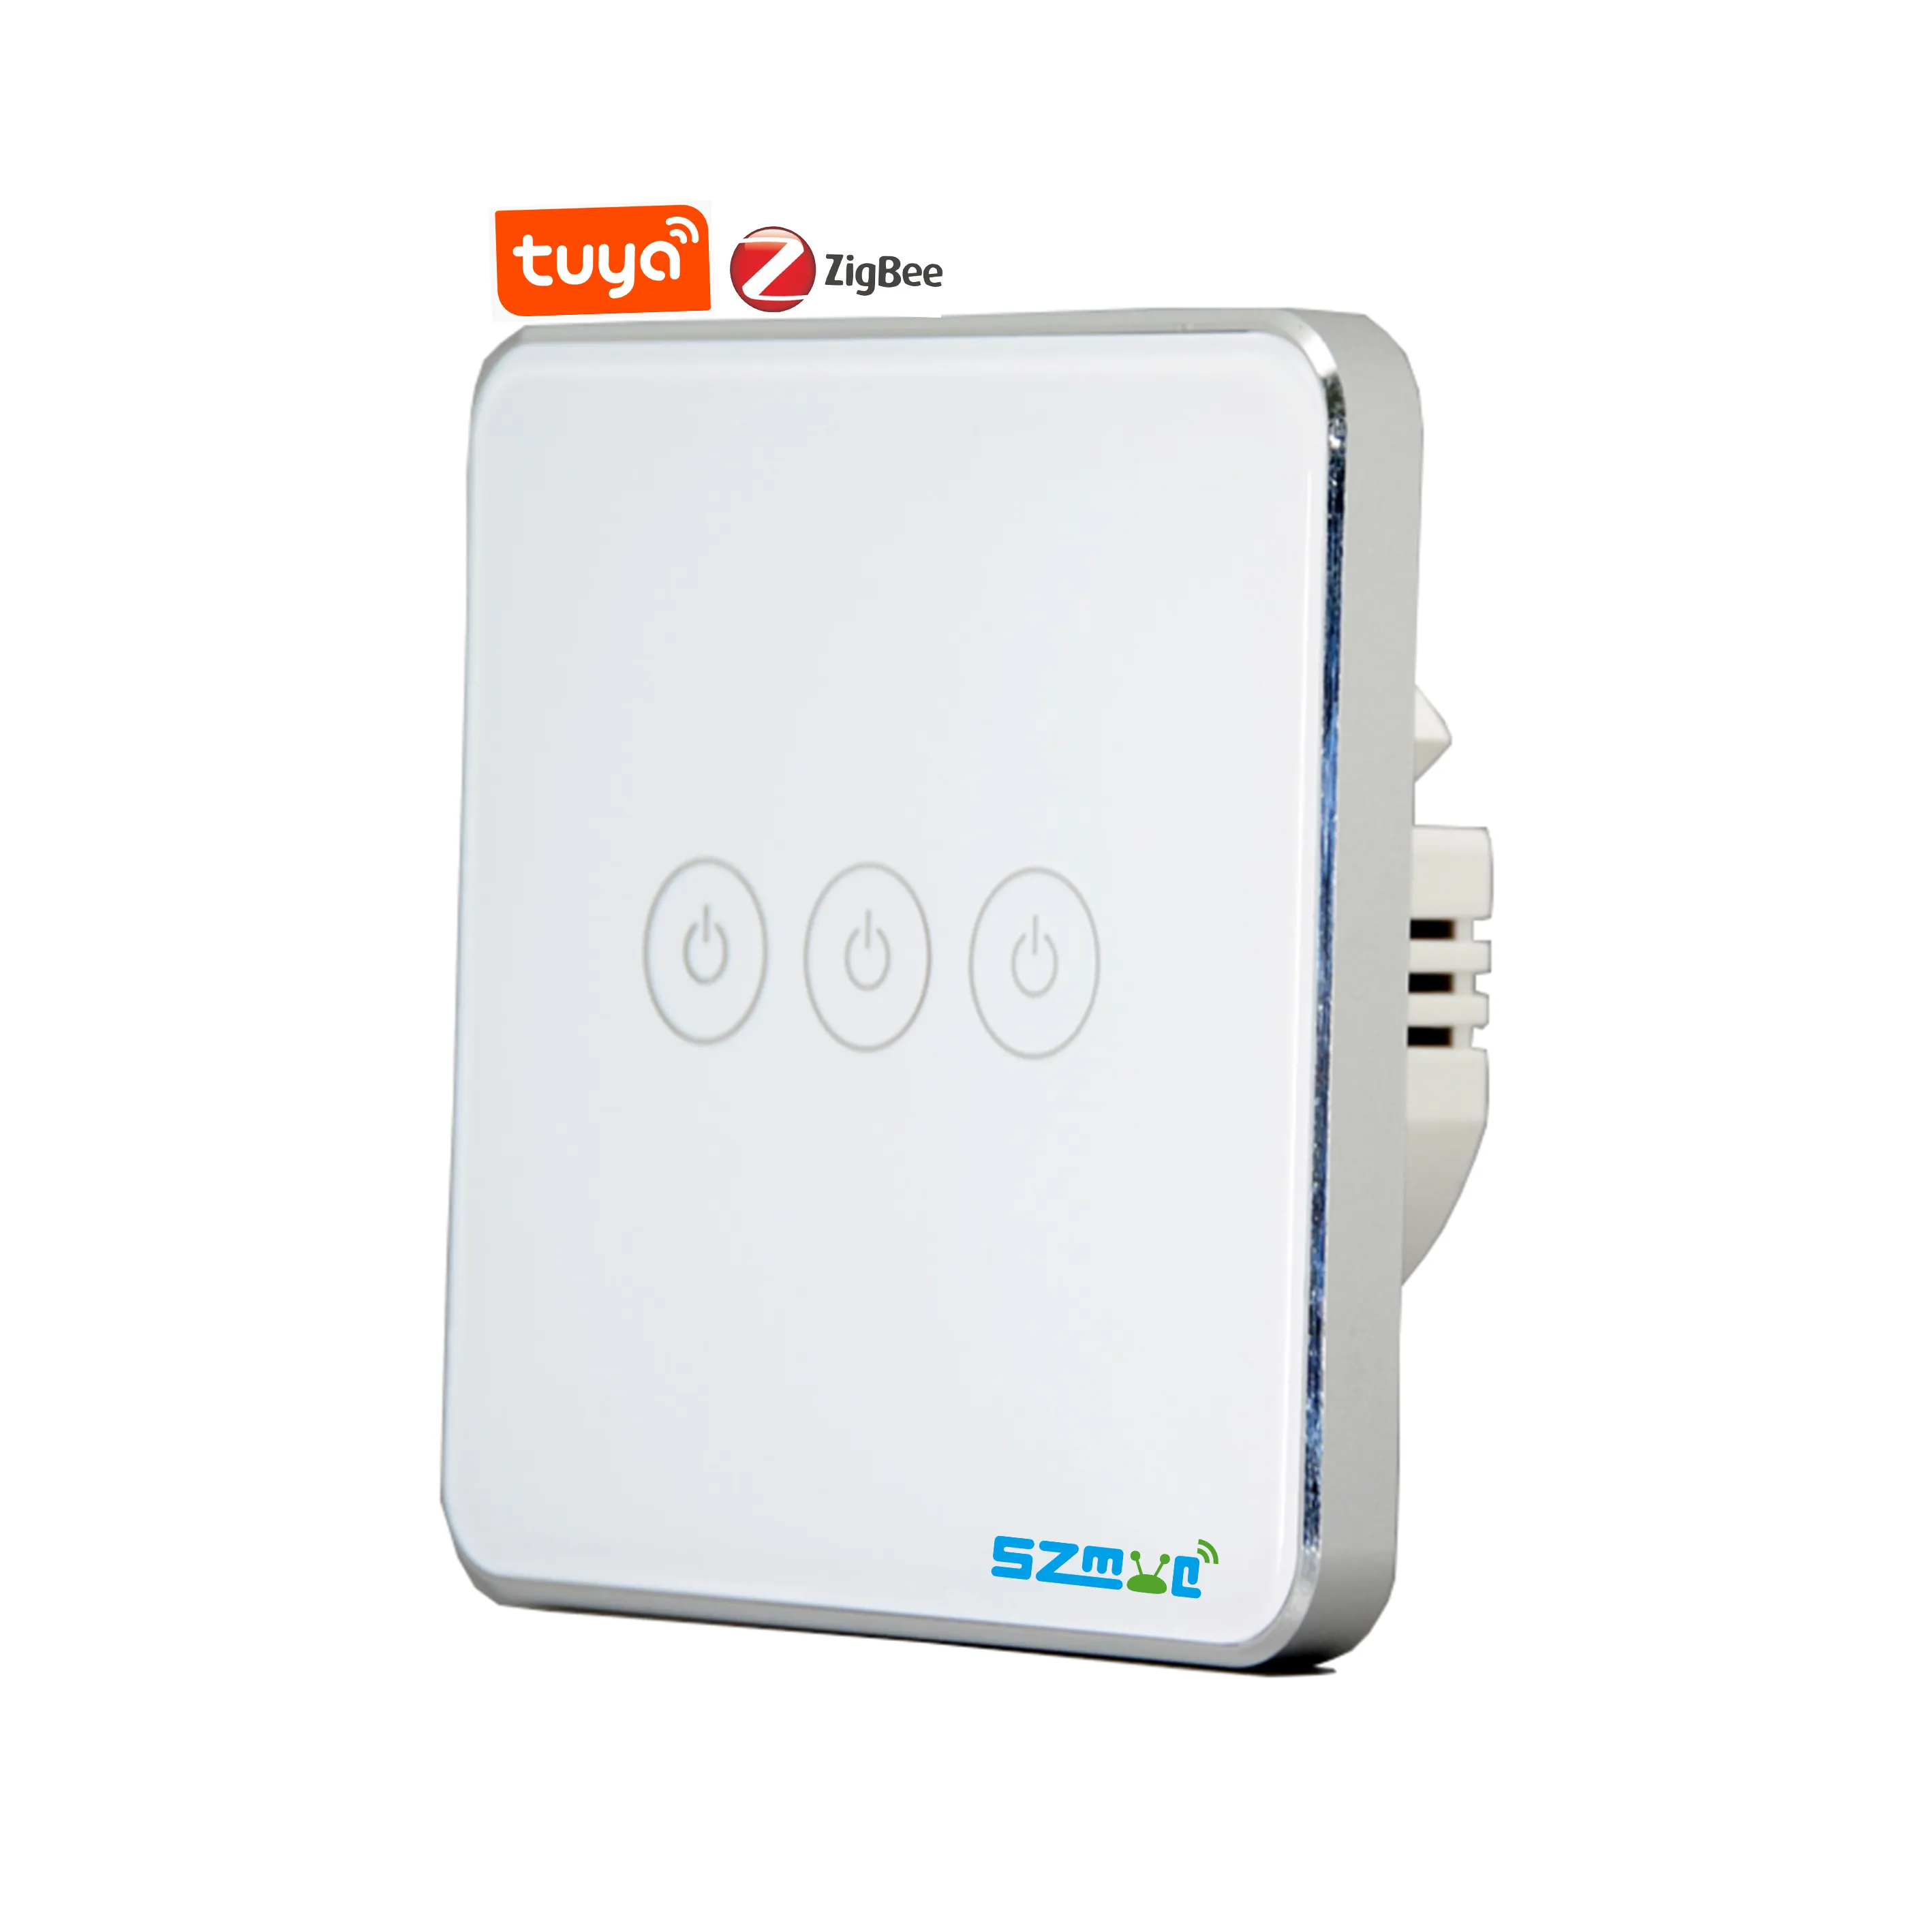 MYQ Tuya Smart Switch Zigbee Light Switch Power Supply Mode without Neutral Wire 3gang without N Magnetic Relay Wireless